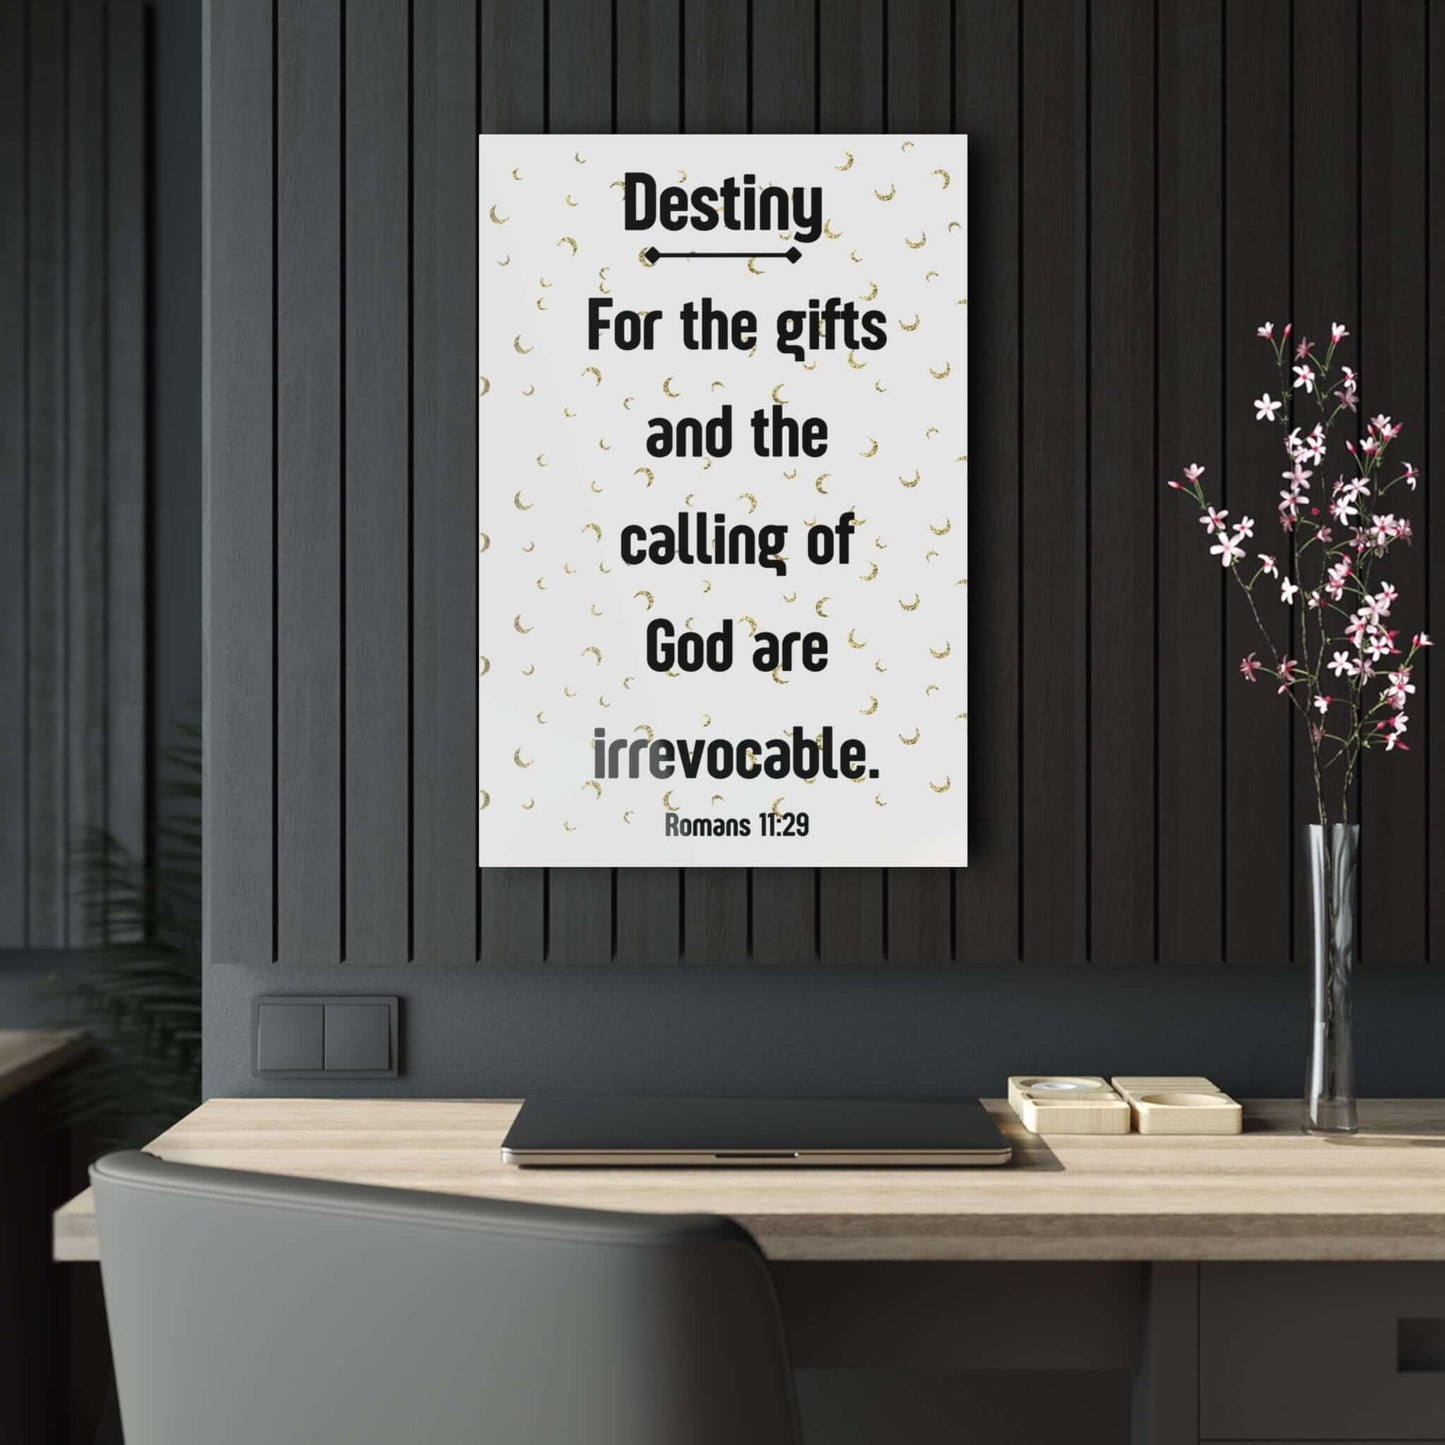 Family Wall Decor - Acrylic Print with Inspirational Scripture | Art & Wall Decor,Assembled in the USA,Assembled in USA,Decor,Home & Living,Home Decor,Indoor,Made in the USA,Made in USA,Poster